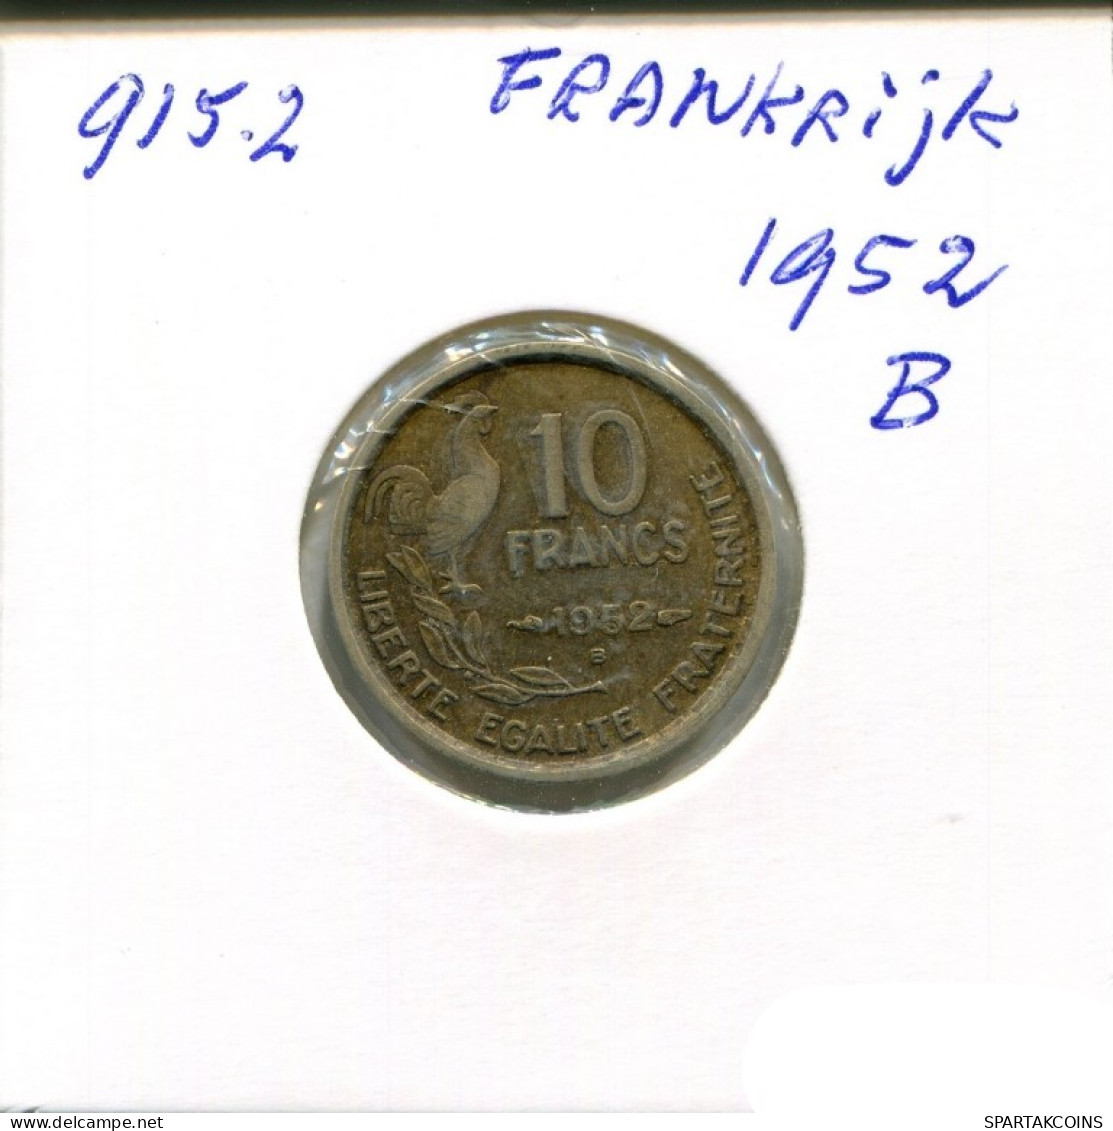 10 FRANCS 1952 B FRANCE Coin French Coin #AN427.U.A - 10 Francs